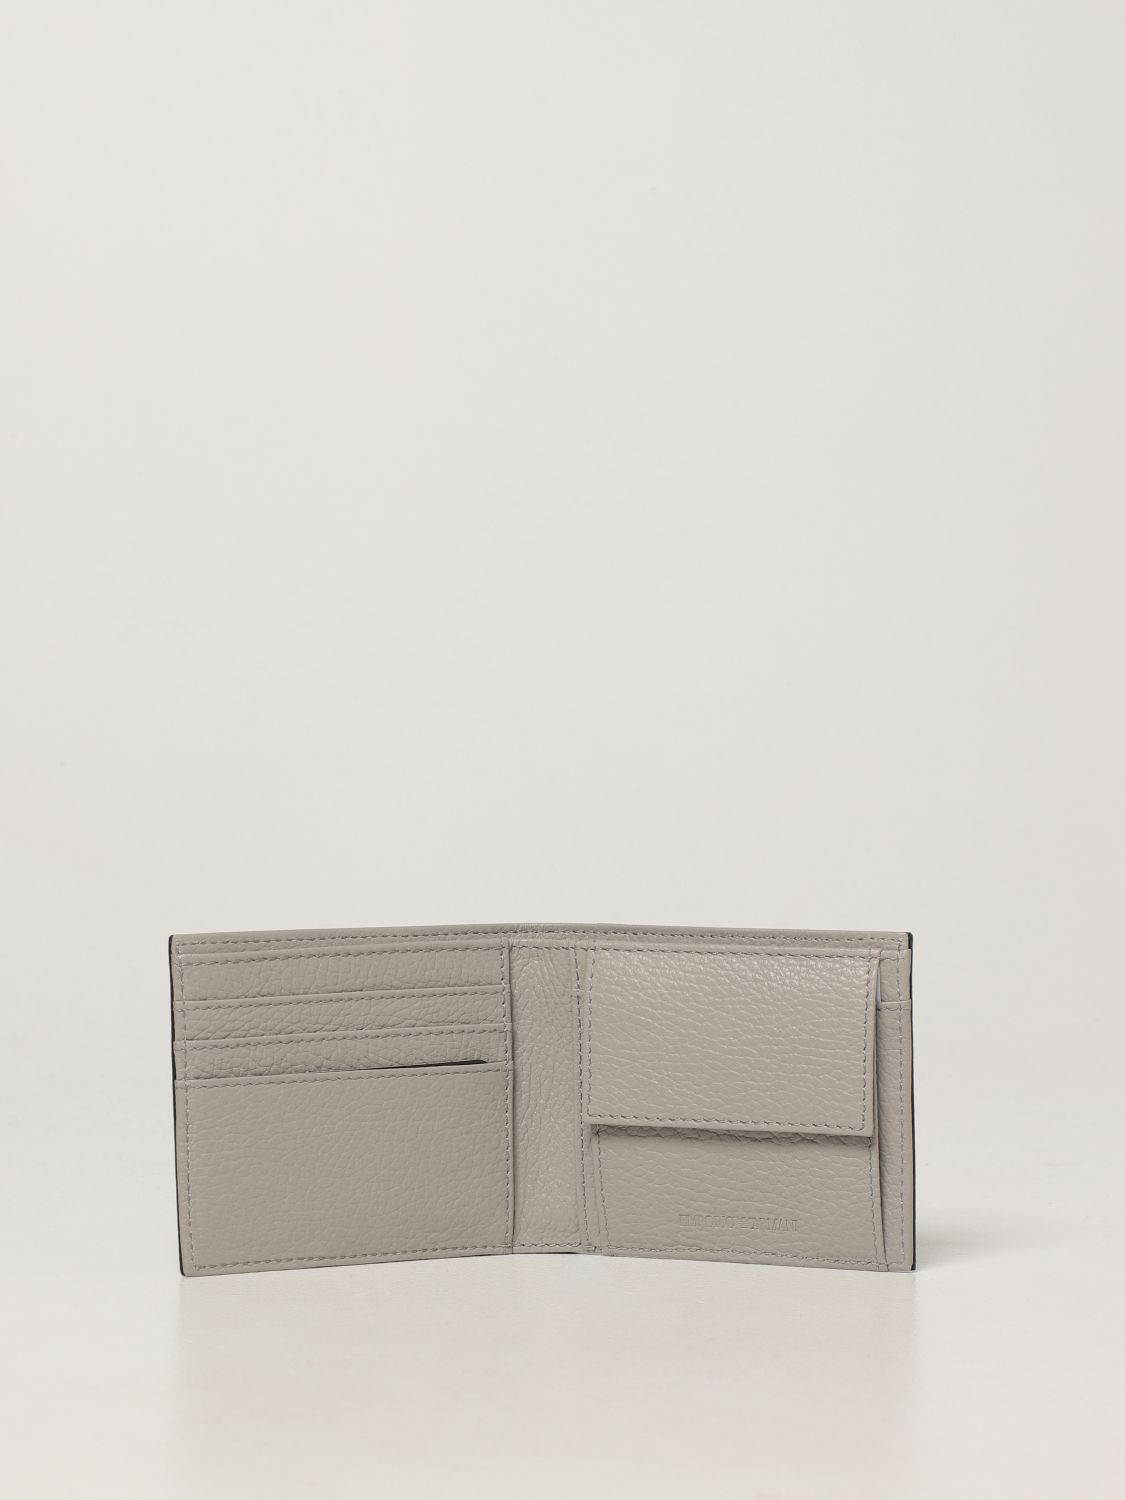 Emporio Armani wallet in textured leather